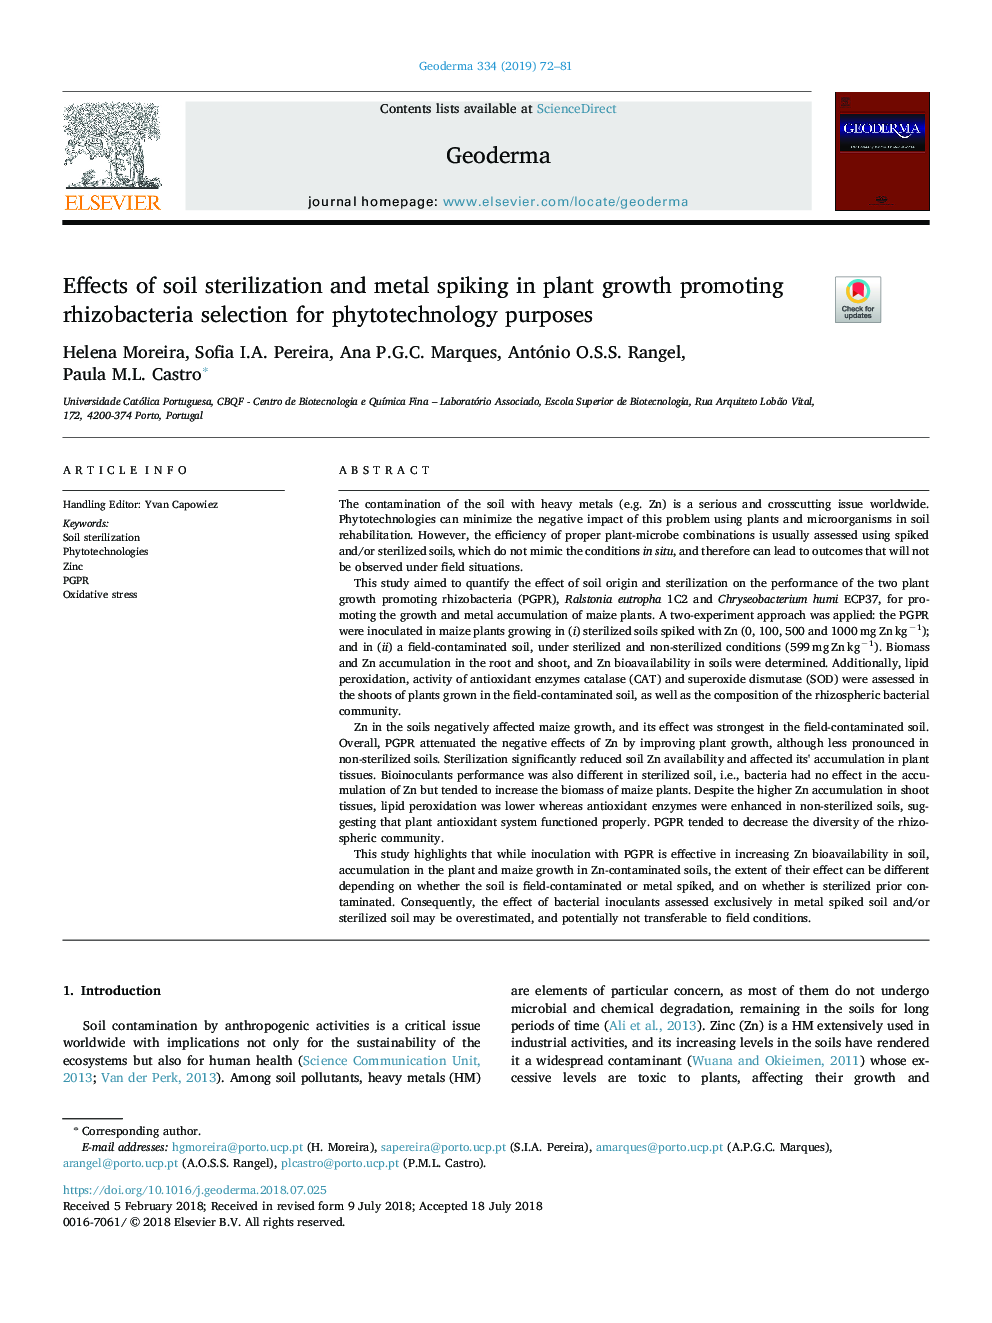 Effects of soil sterilization and metal spiking in plant growth promoting rhizobacteria selection for phytotechnology purposes